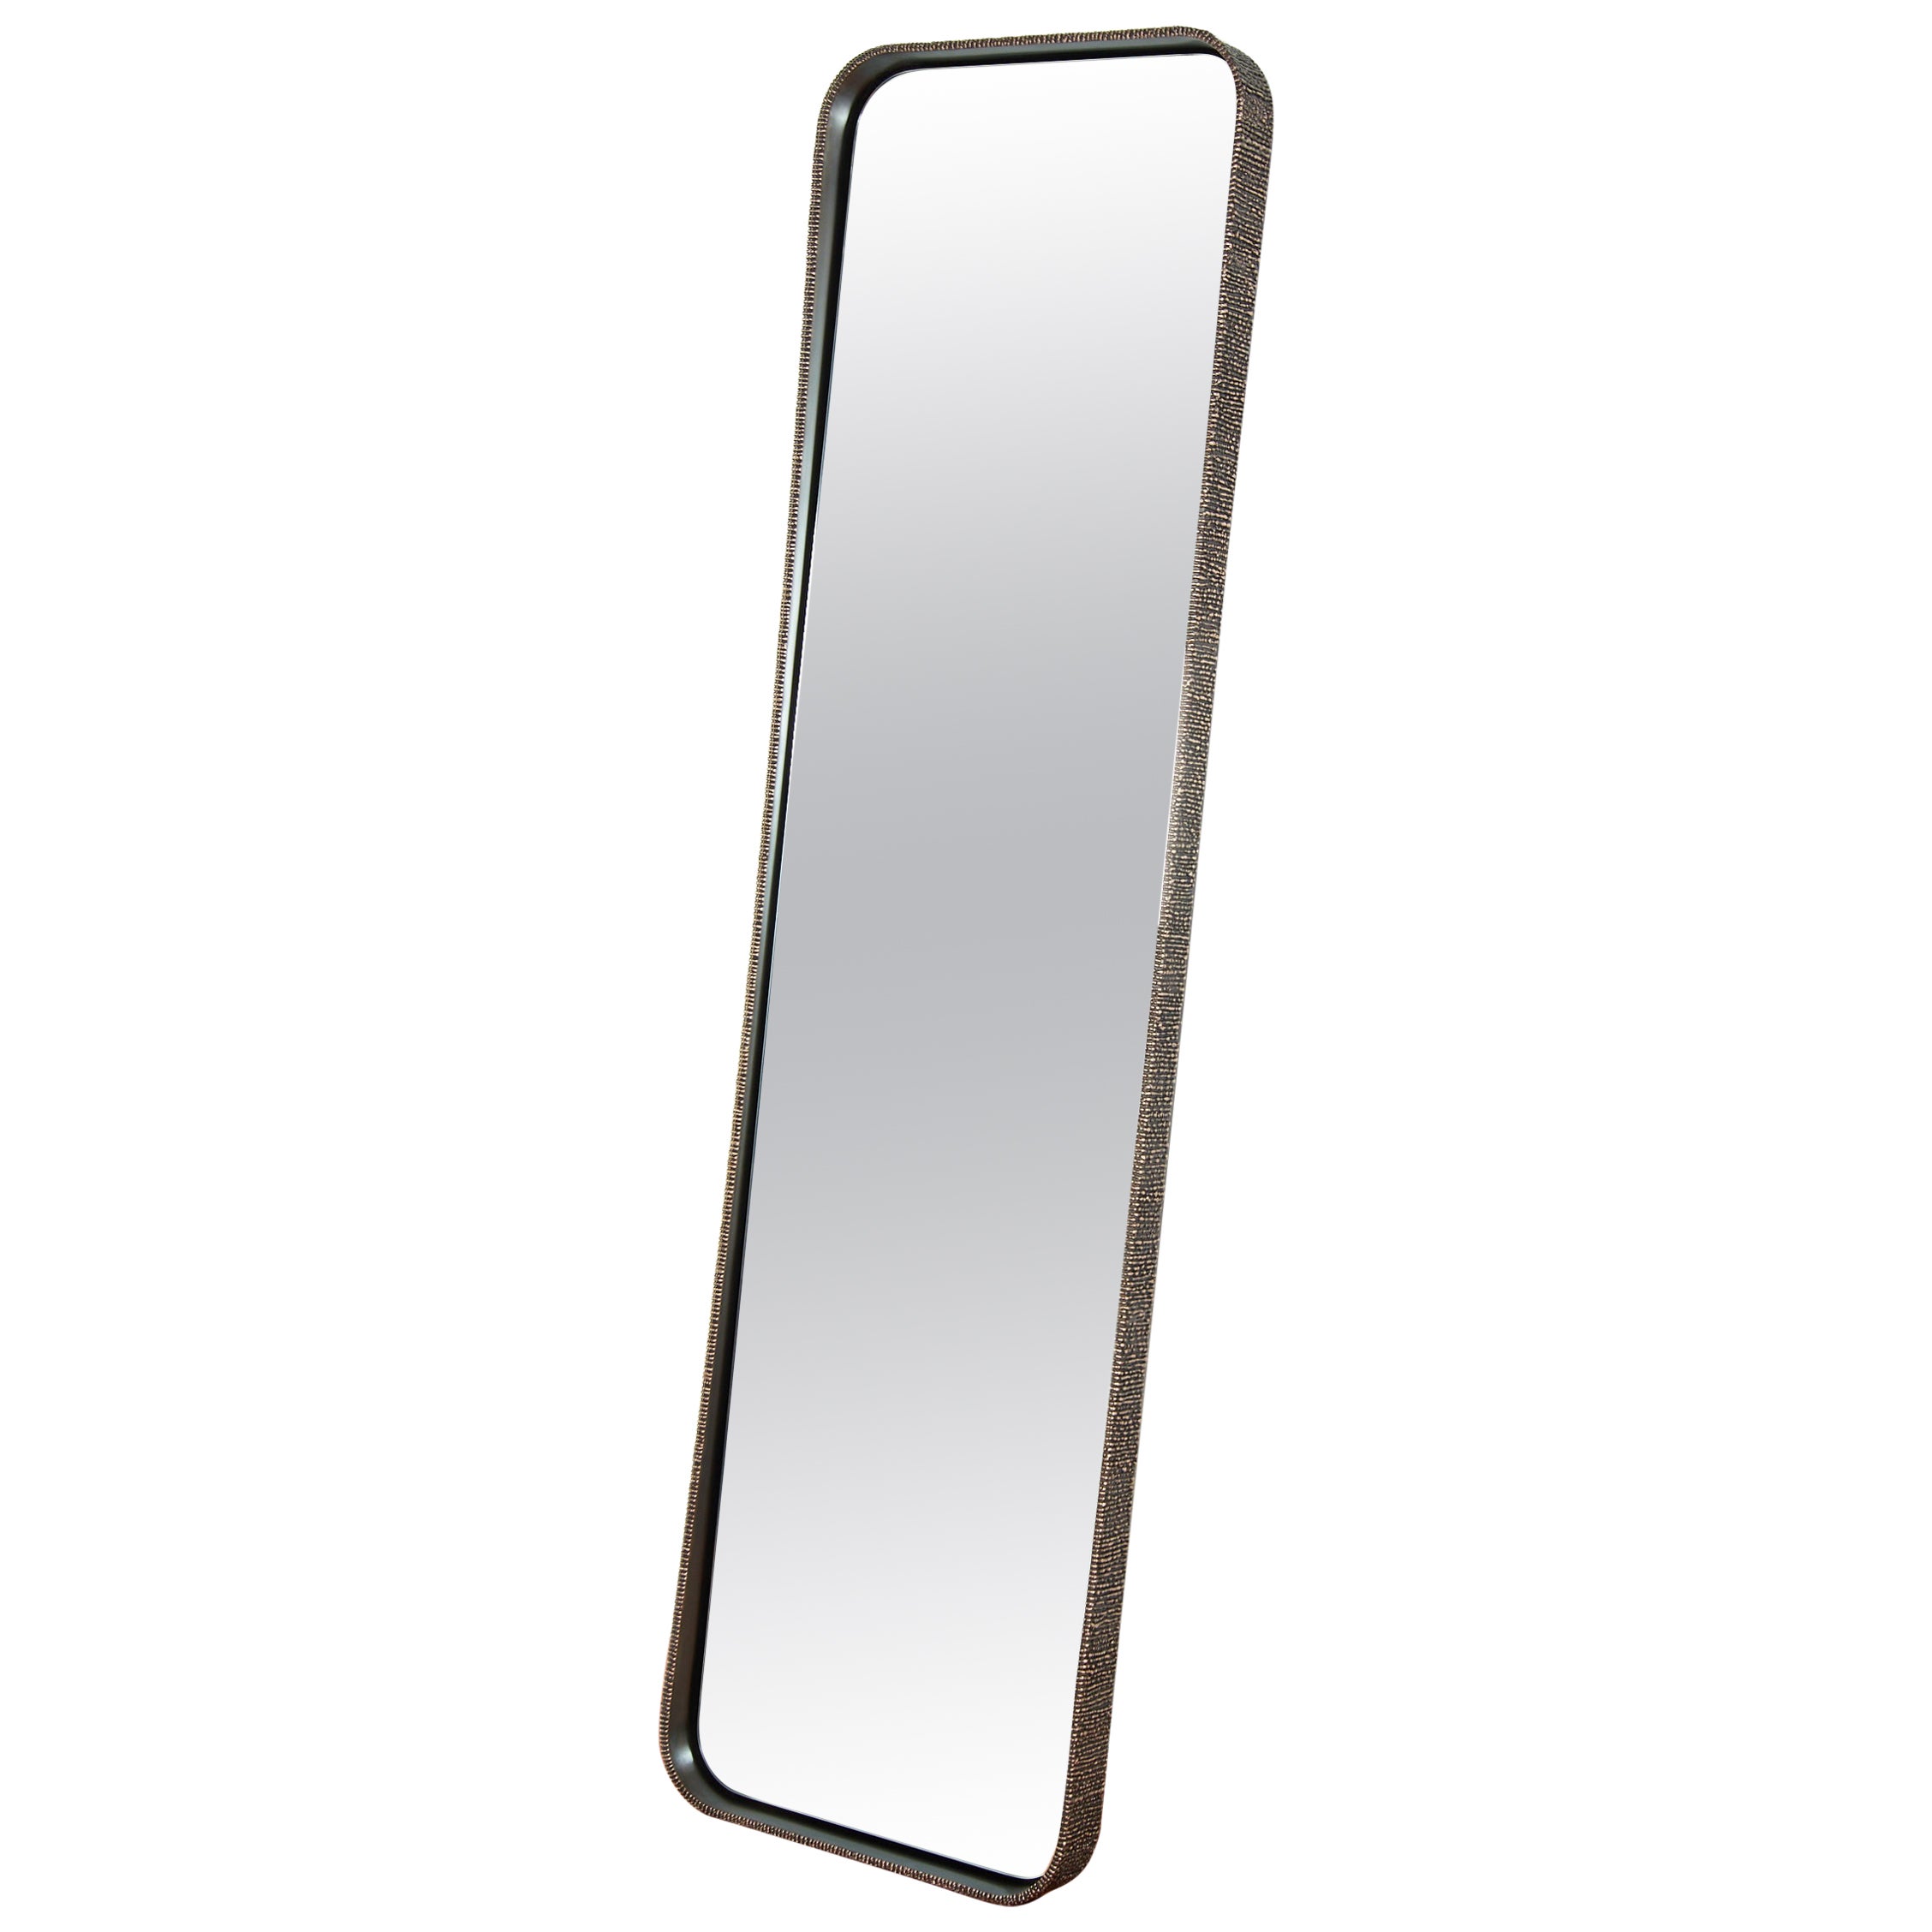 Elongated Molten Mirror by William Emmerson  For Sale